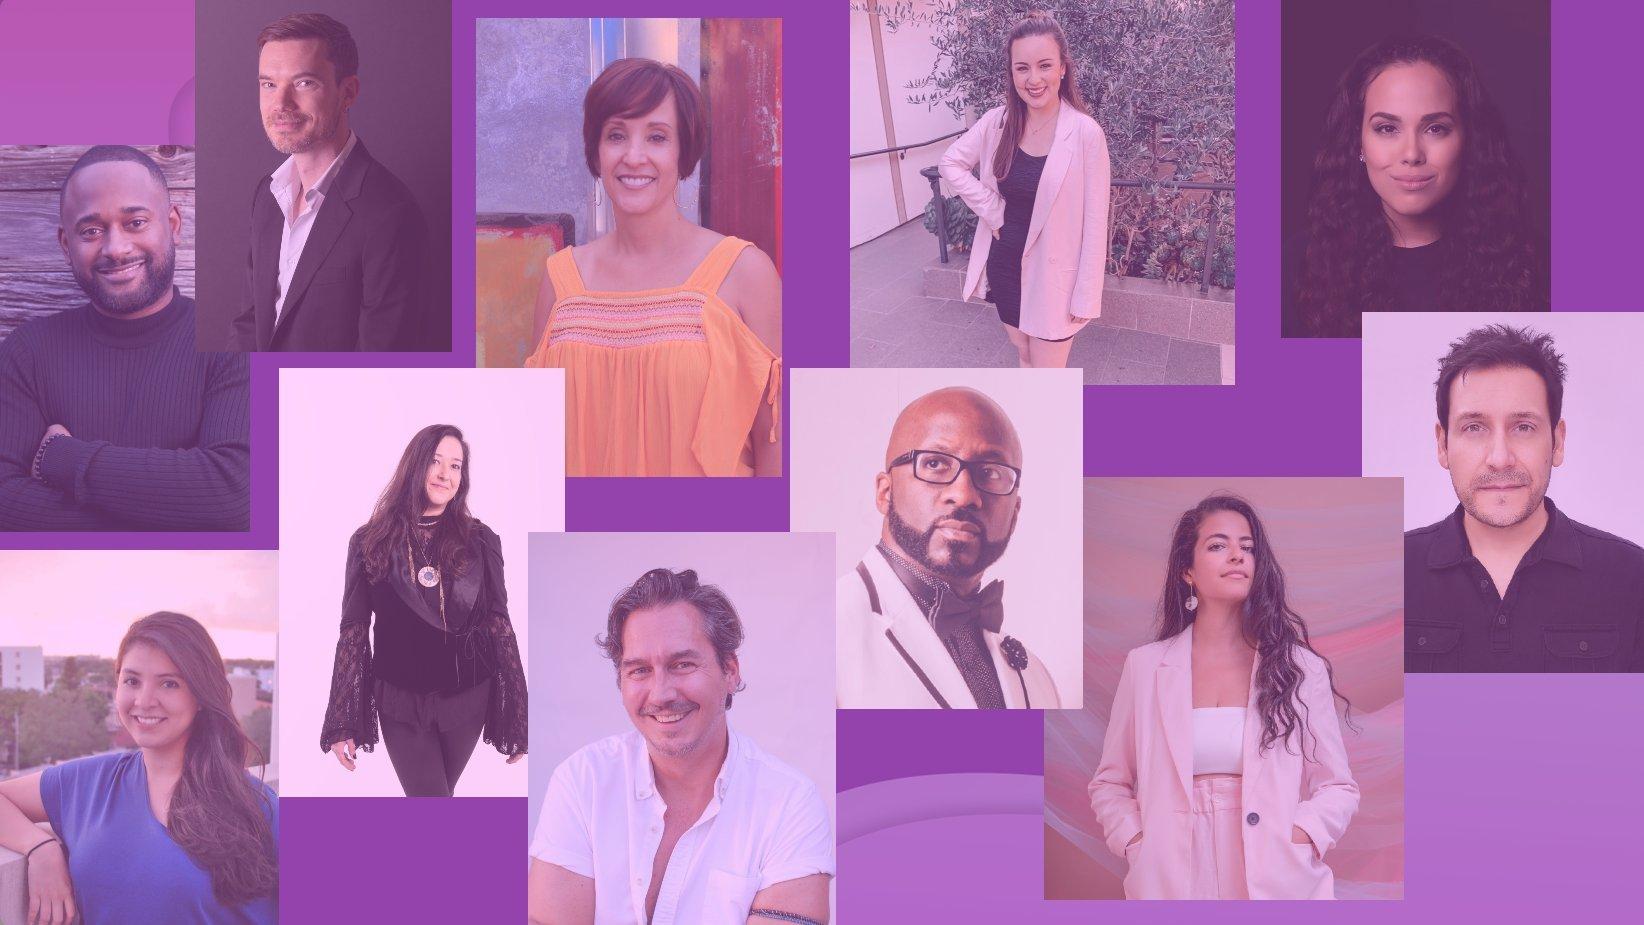 The Latin Recording Academy® Launches Second Annual Mentorship Program and  Virtual Panel, In Partnership With She Is The Music